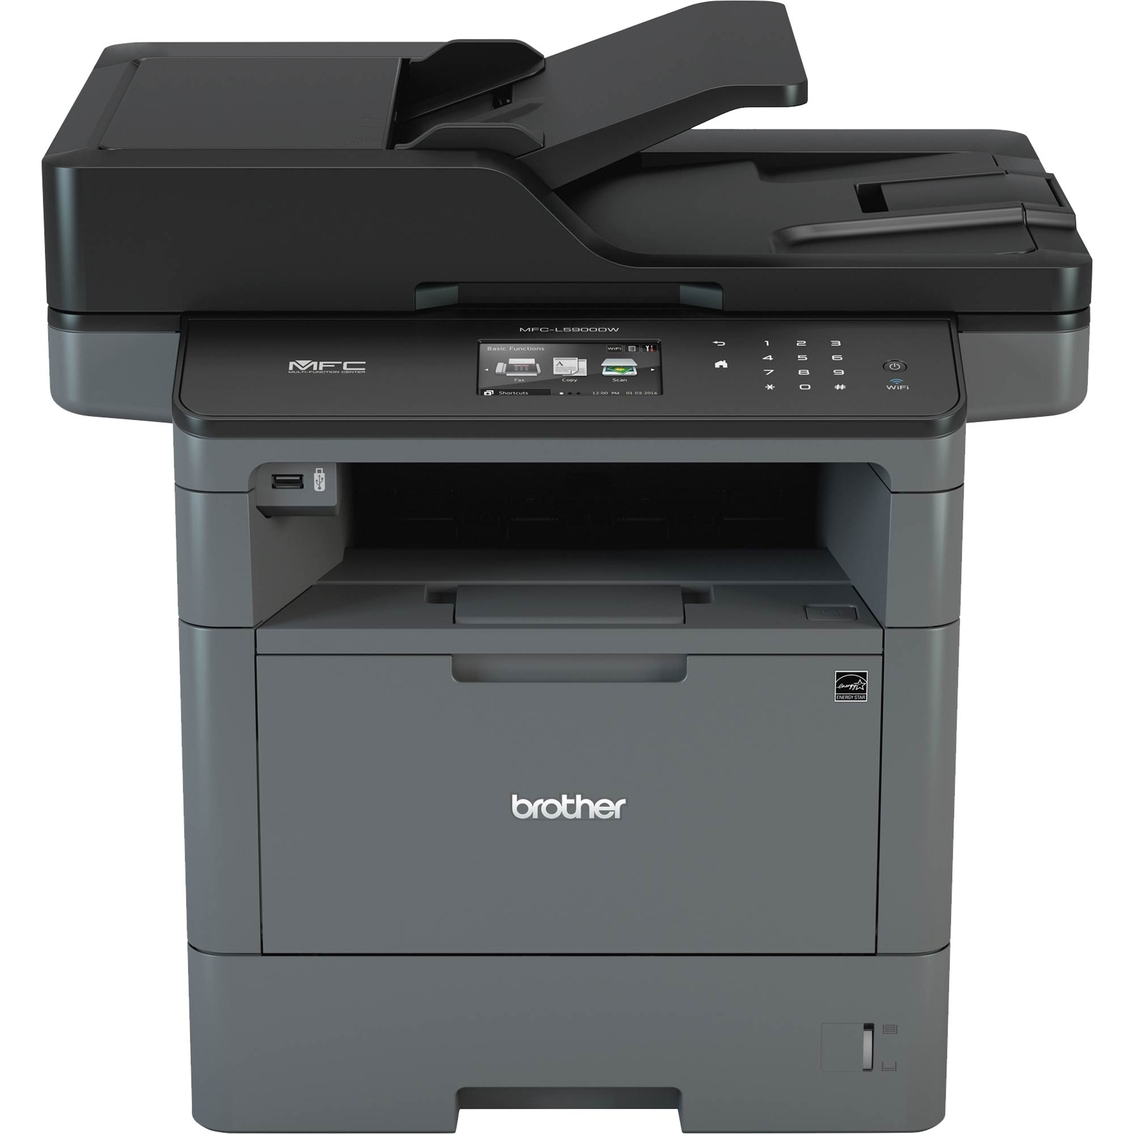 Brother MFC-L5900DW All-in-One Laser Printer - Image 2 of 5